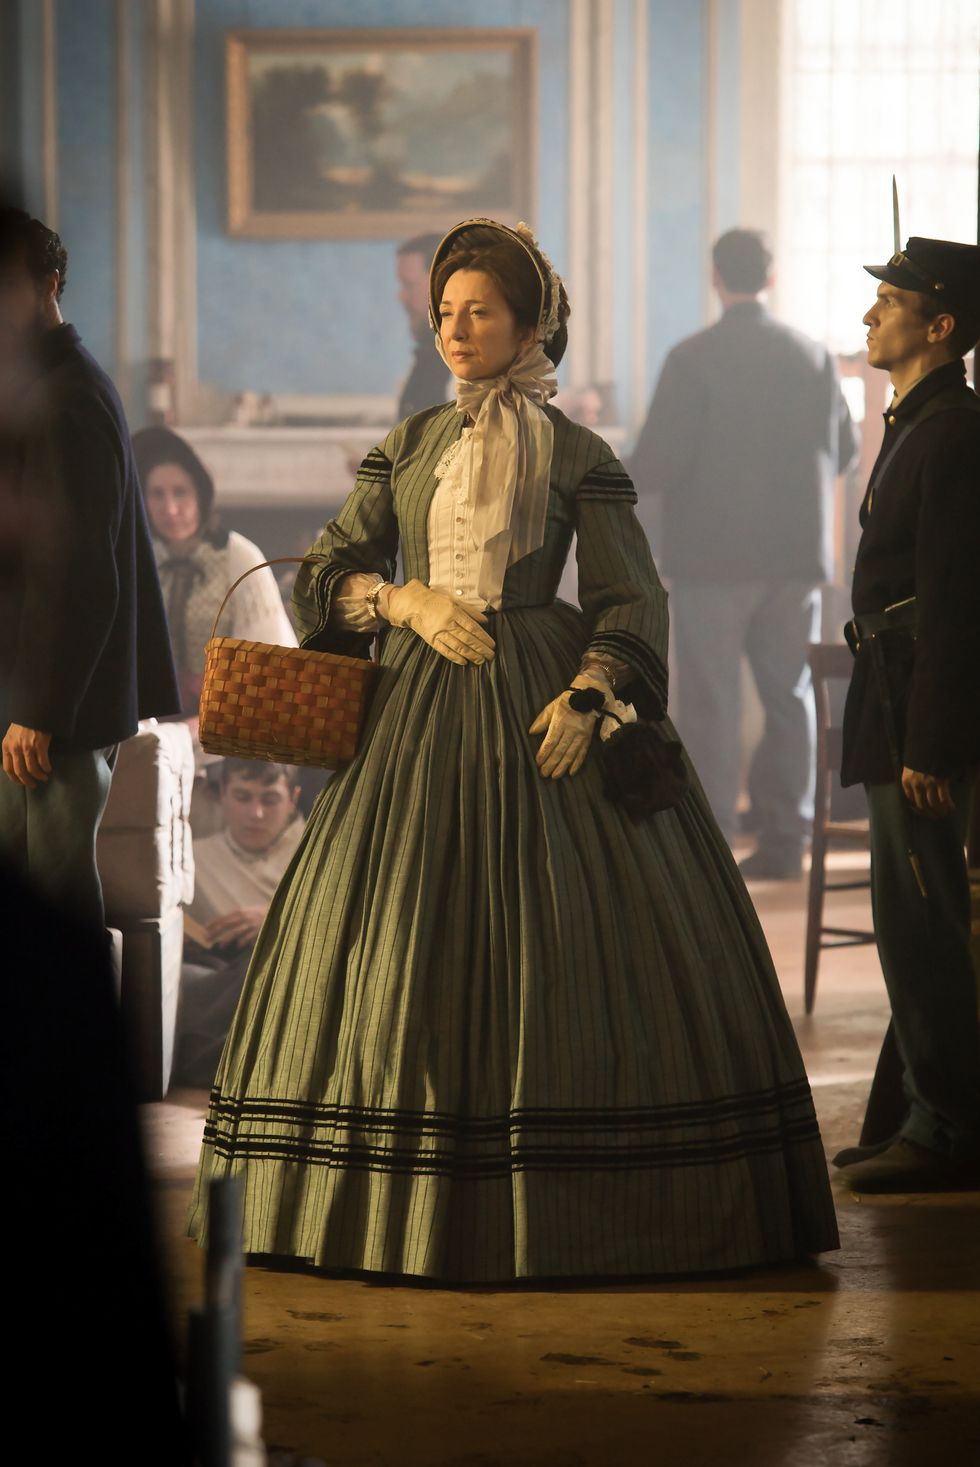 Get an Exclusive Look at the Costumes of 'Mercy Street'